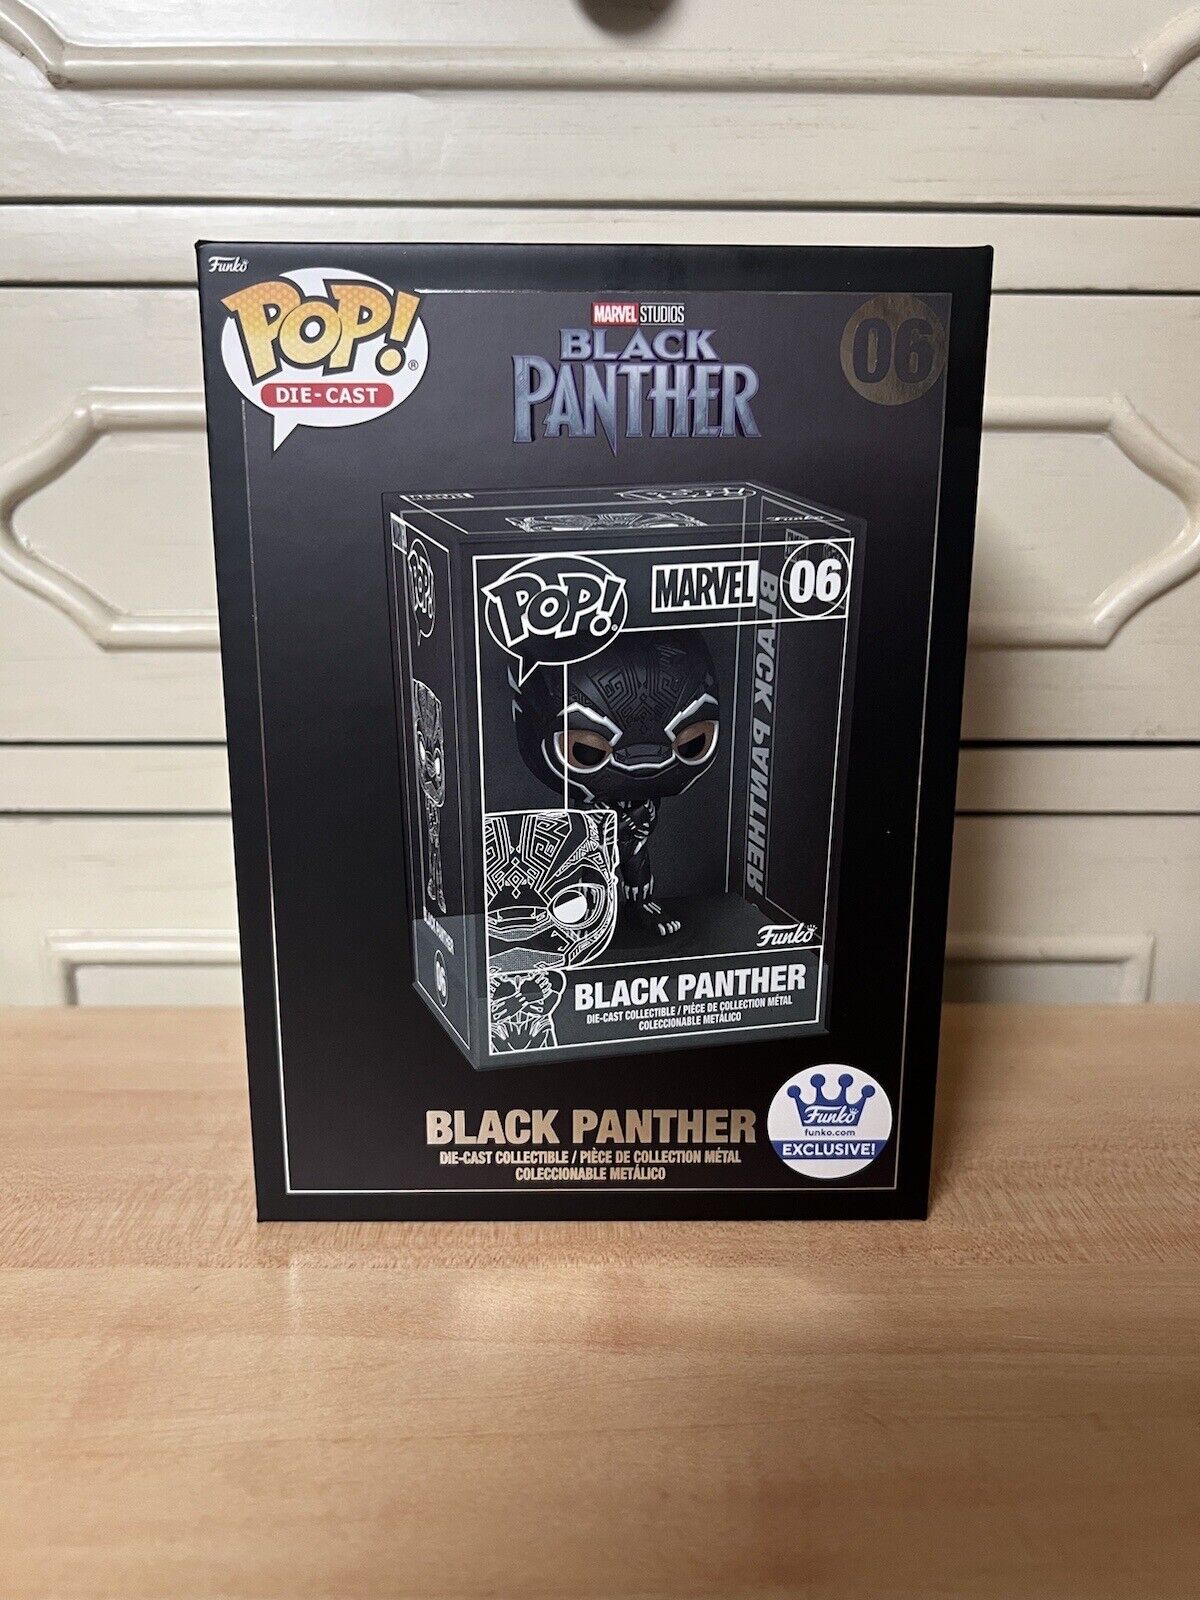 Funko Pop Diecast: Marvel - Black Panther - Funko (Exclusive) #06 opened Common